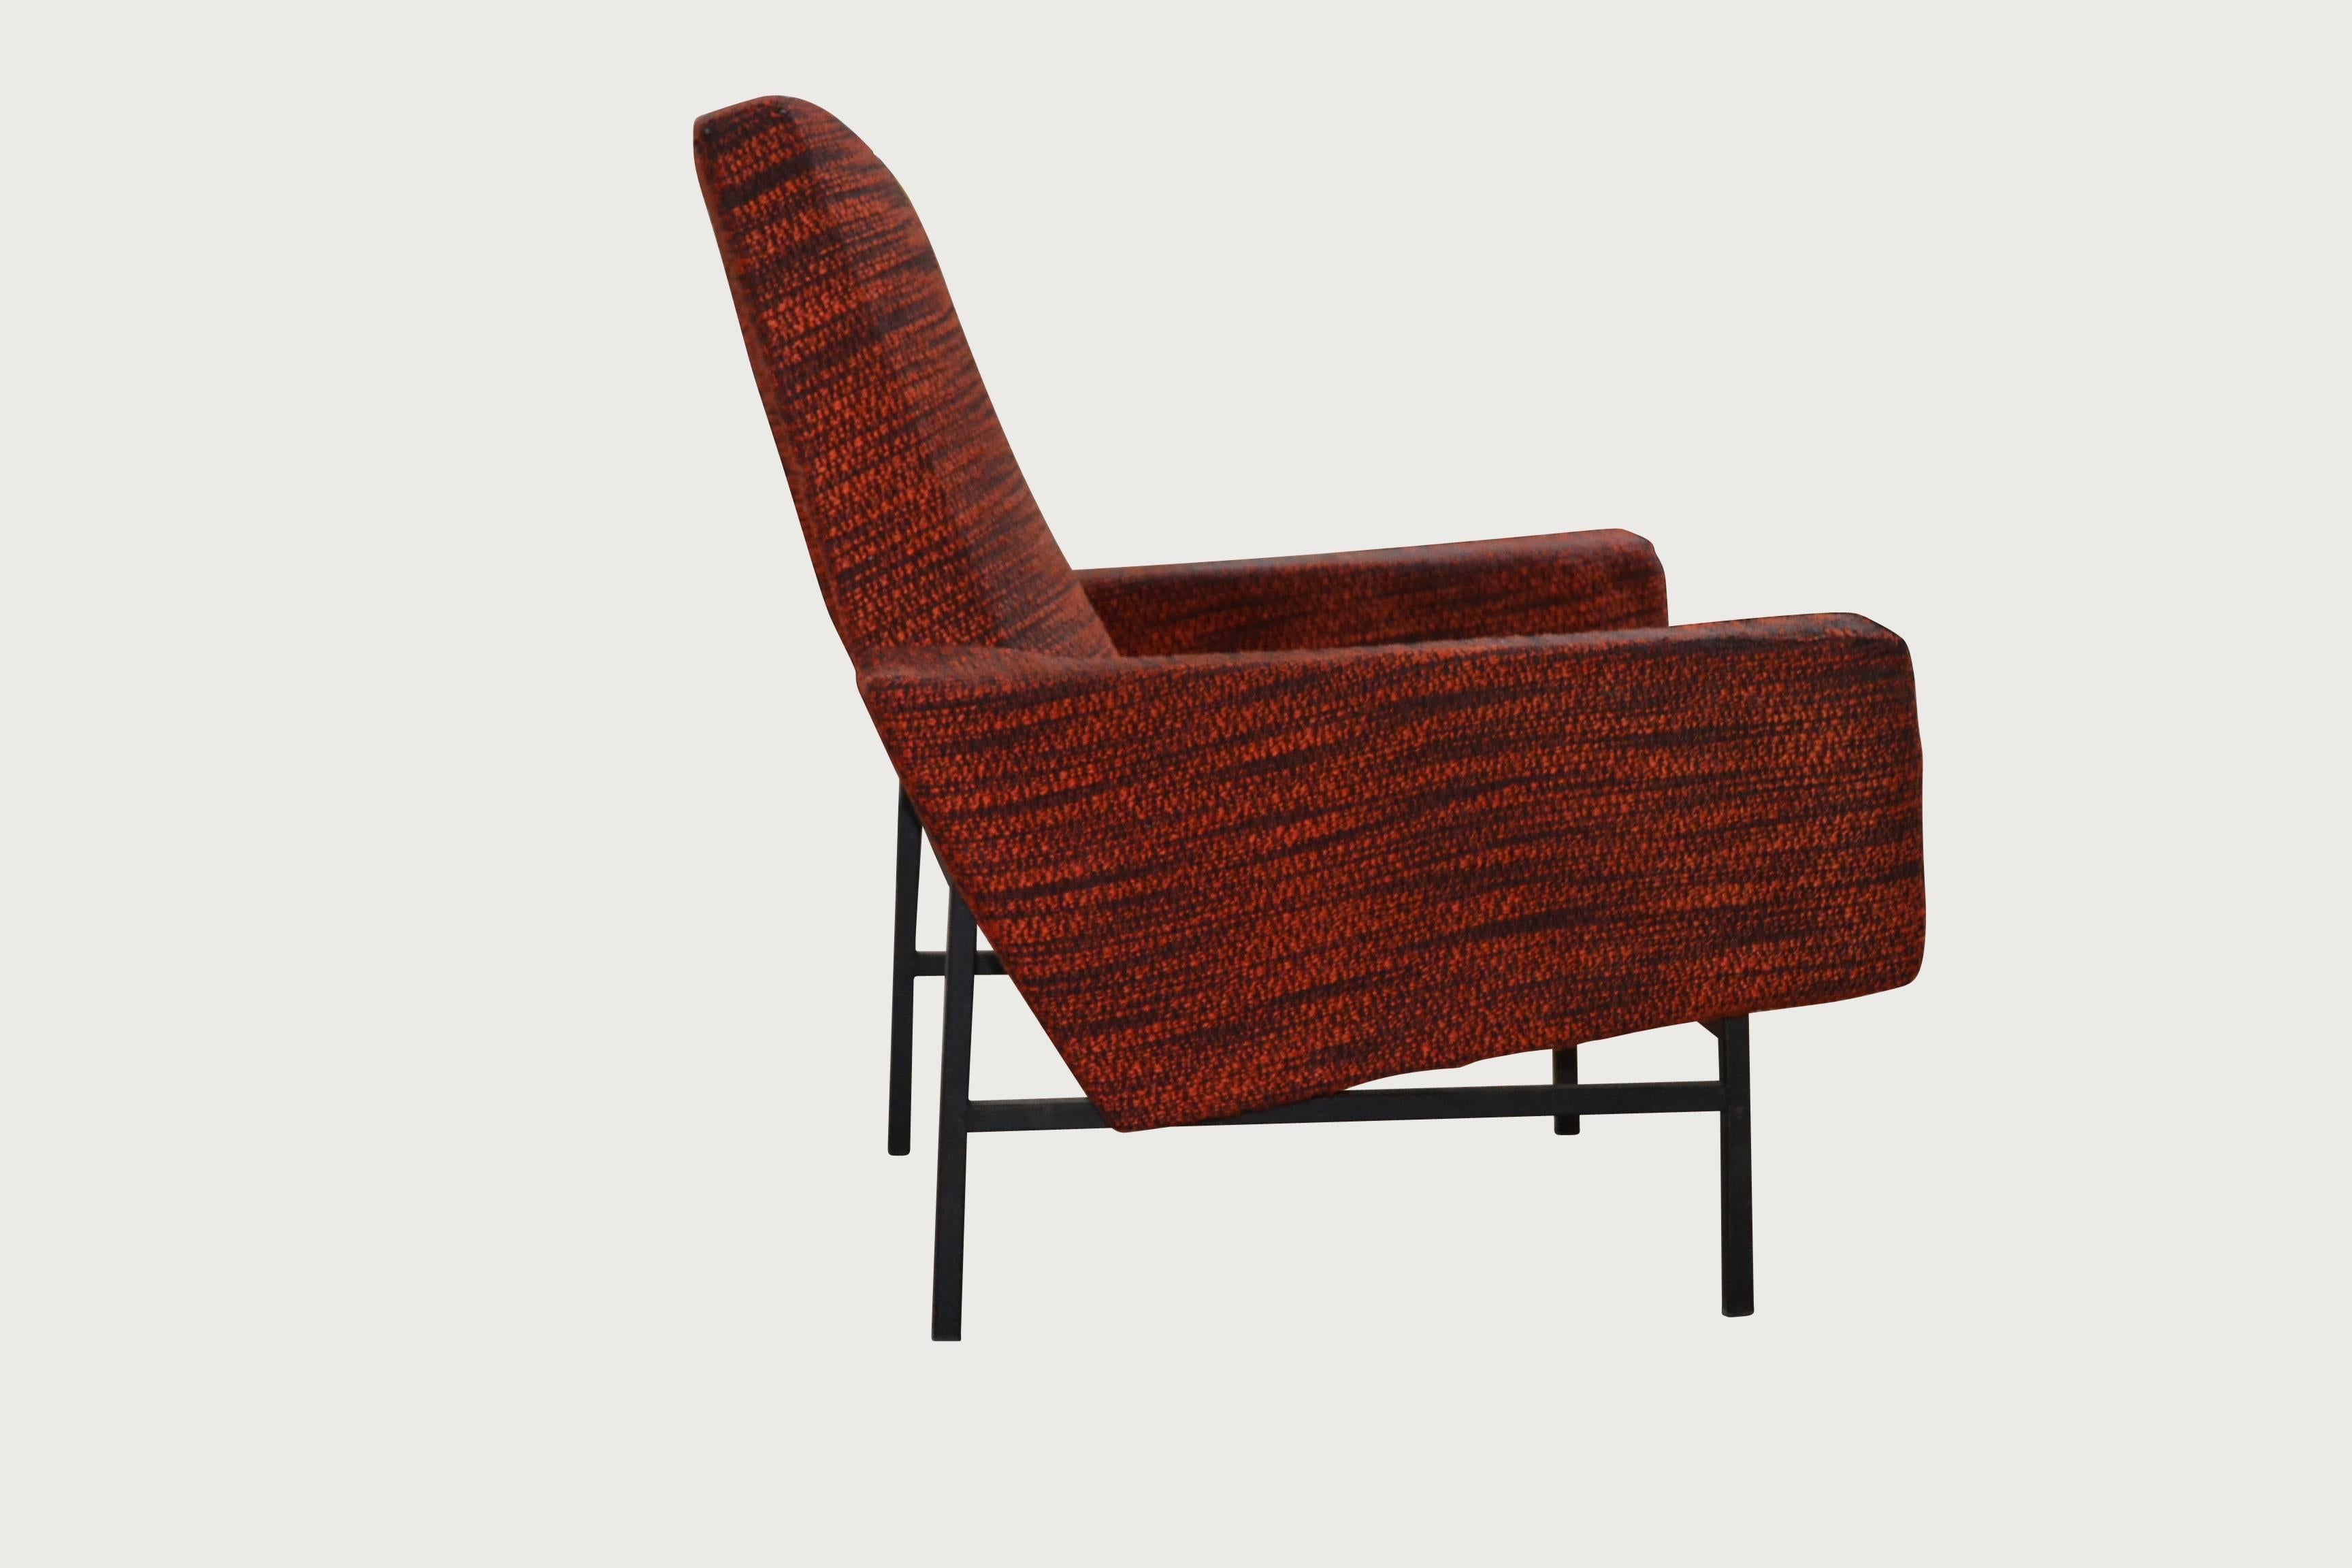 Single armchair model 645 designed by Pierre Guariche and
manufactured by Steiner.